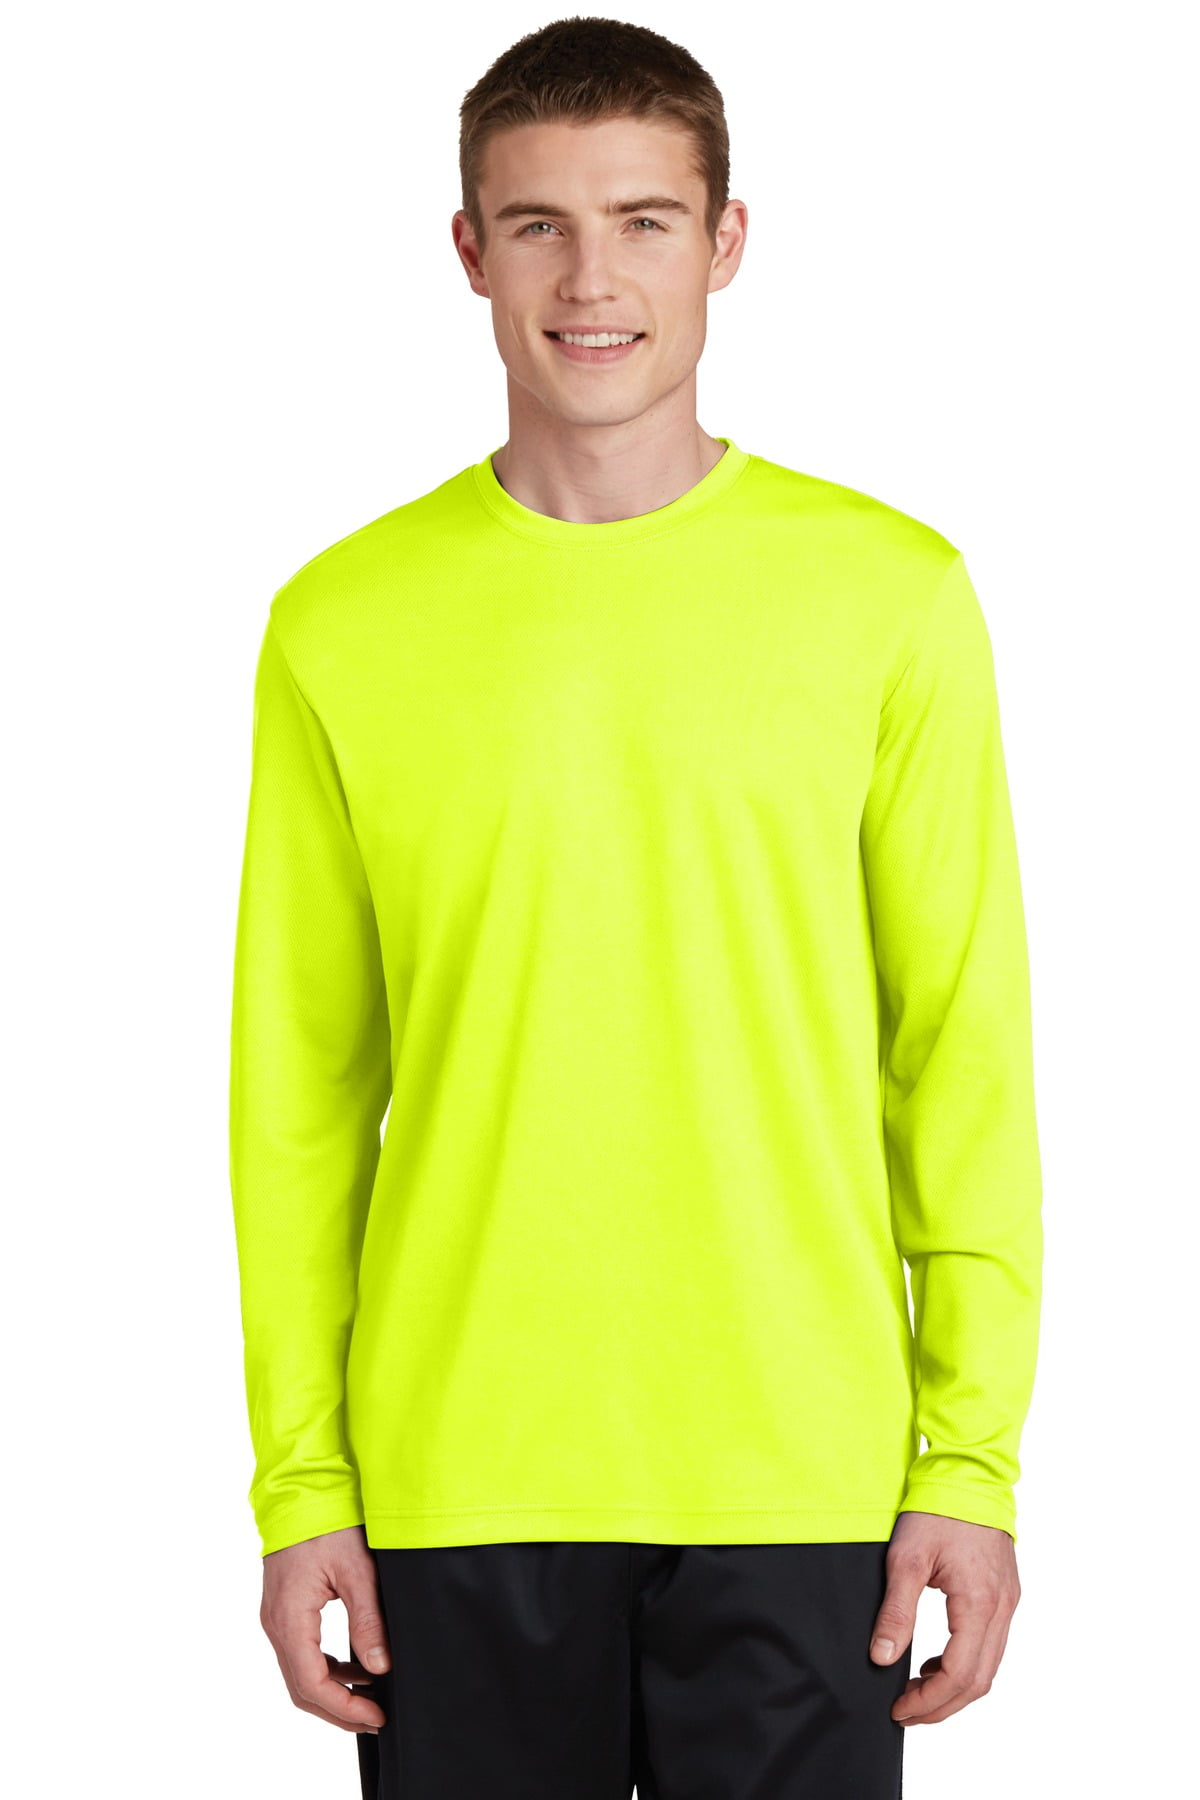 NWT Under Armour UA Running All Seasongear Fitted Men Neon Yellow Long Sleeve XL 